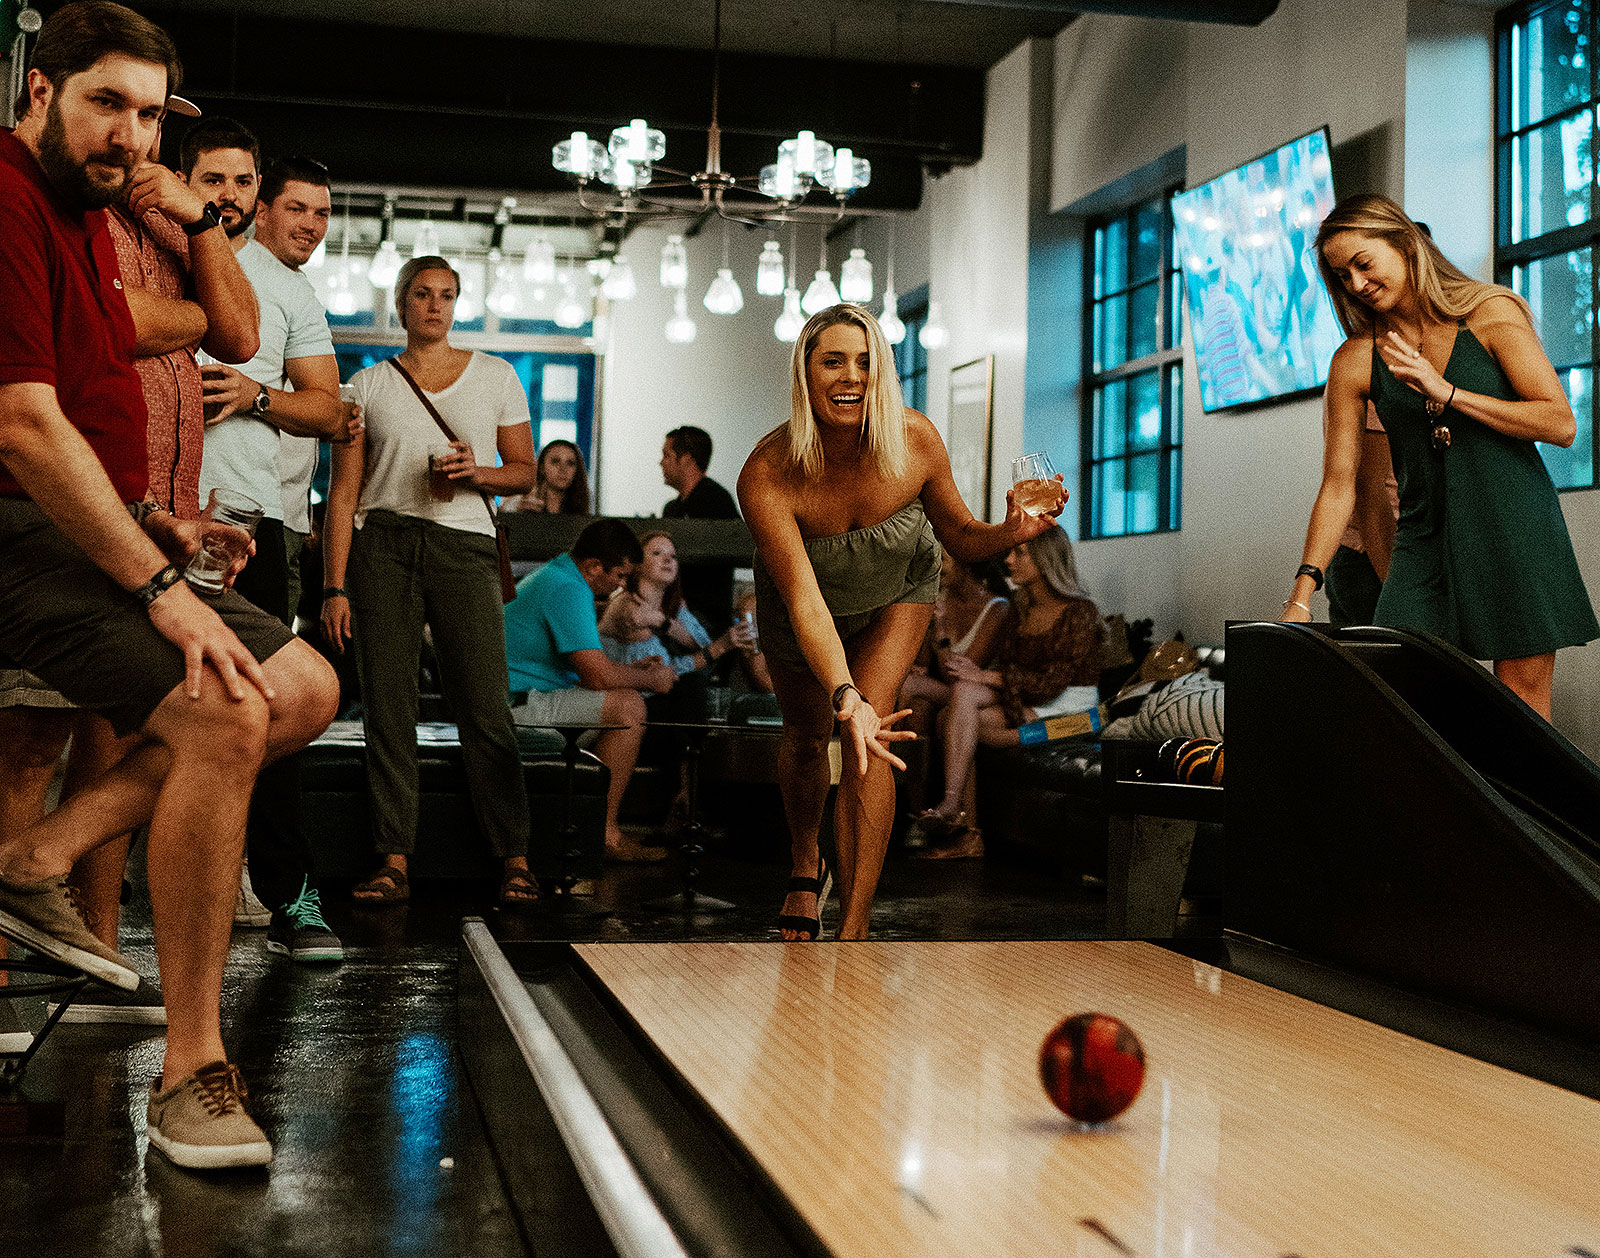 Open Bowling in Torrevieja September 16 to 24 |  Spain Post – Alicante, Malaga, Gran Canaria